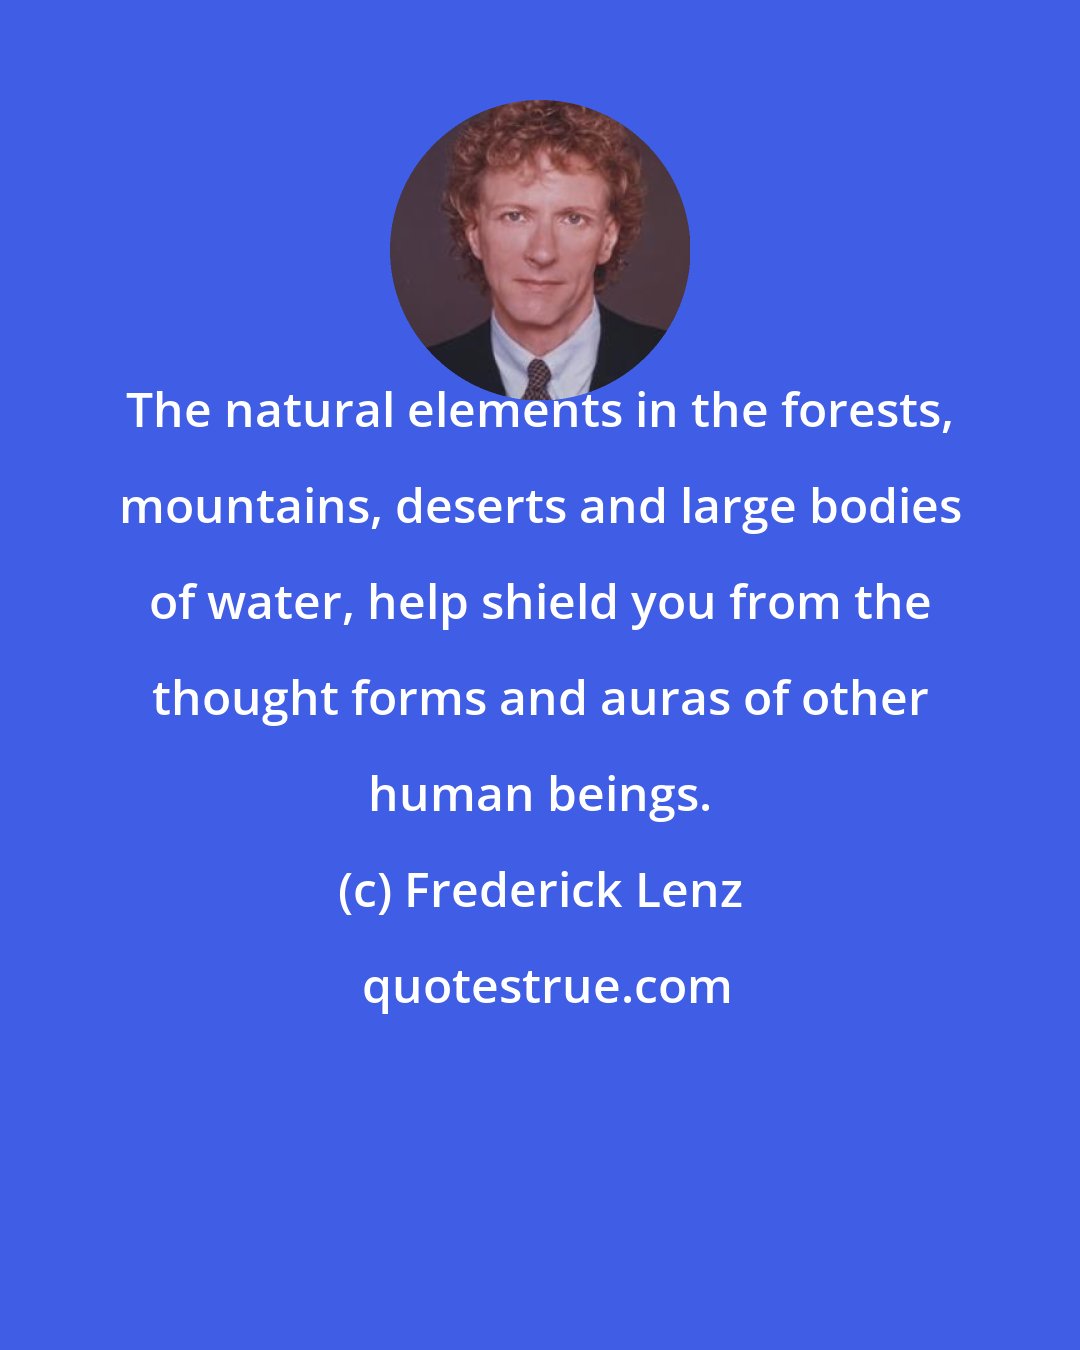 Frederick Lenz: The natural elements in the forests, mountains, deserts and large bodies of water, help shield you from the thought forms and auras of other human beings.